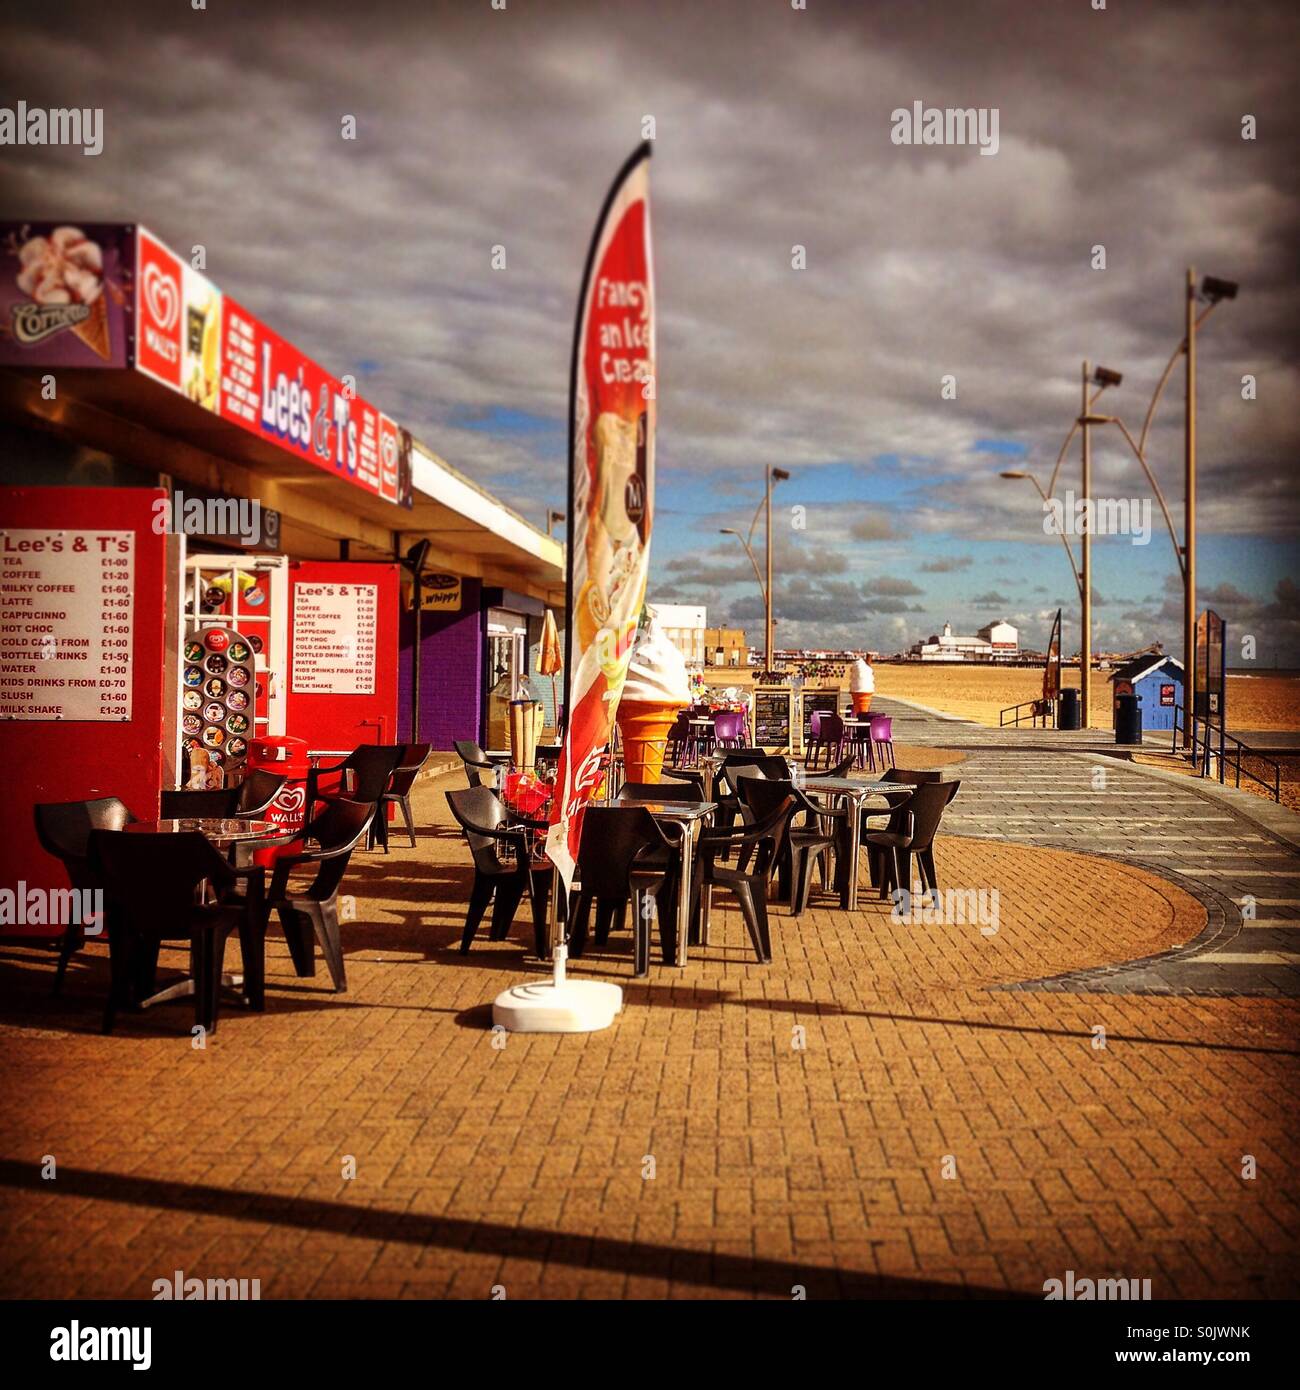 Great Yarmouth Beach front cafe Stock Photo